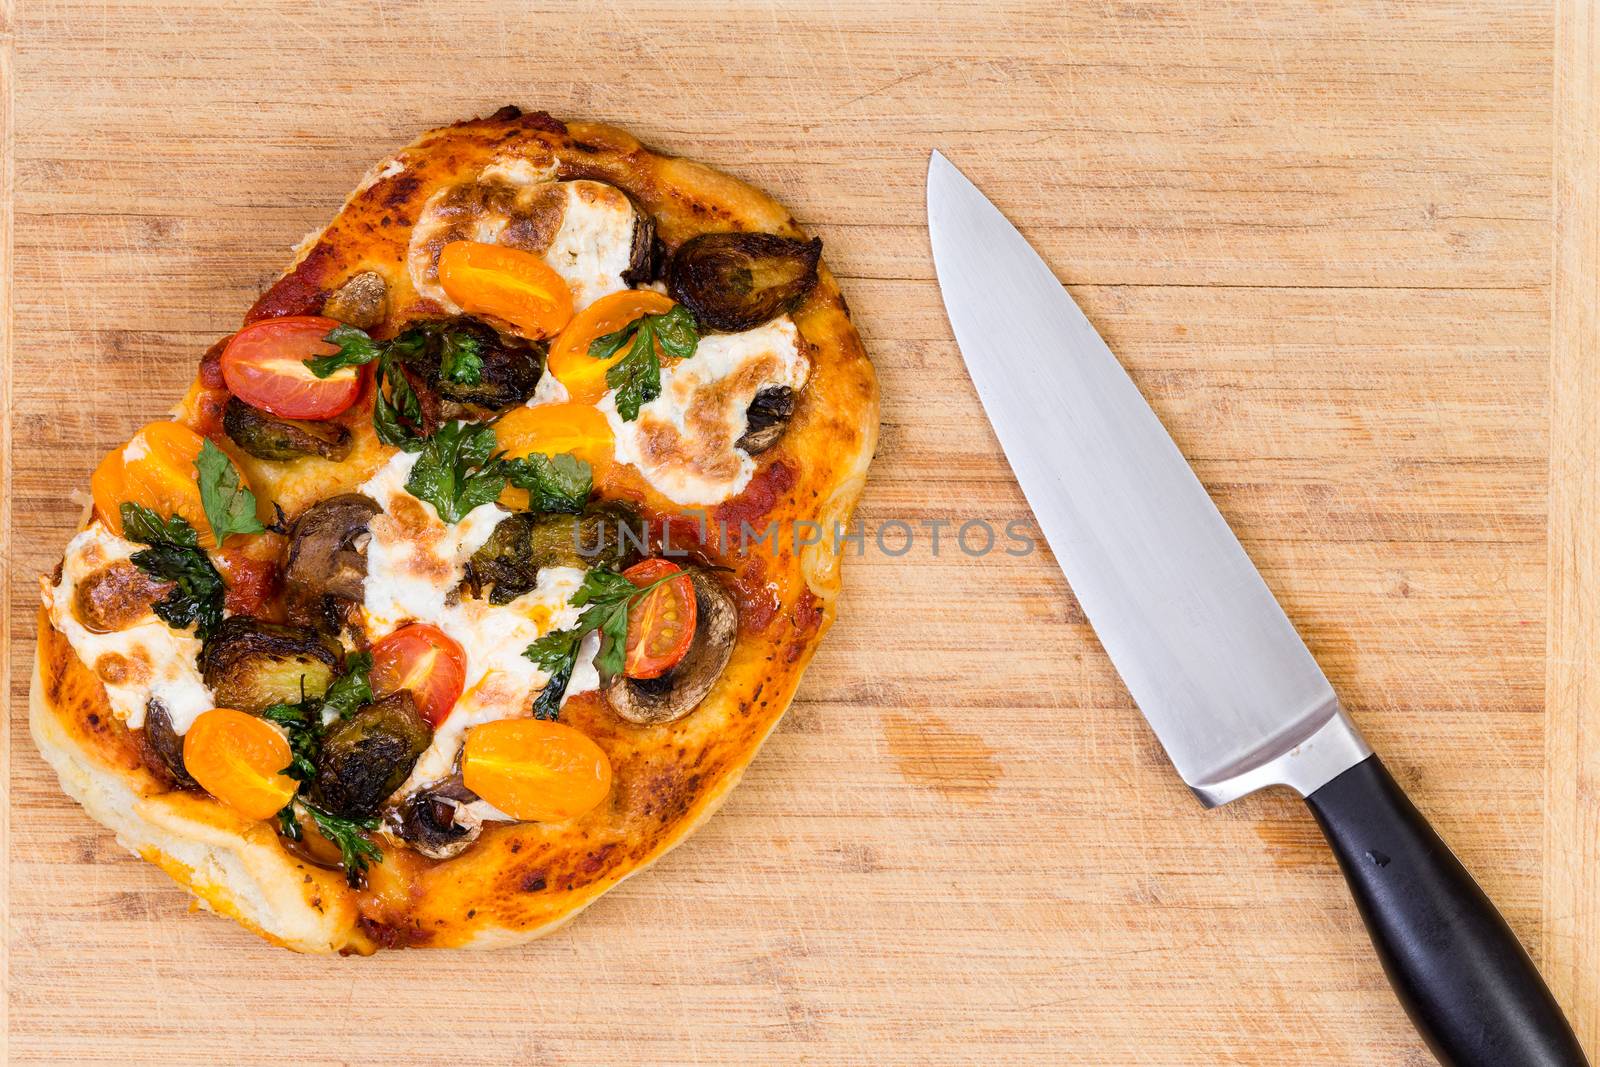 Freshly baked hand tossed vegetarian pizza with mushrooms, tomato and mozzarella cheese on a wooden cutting board alongside a kitchen knife